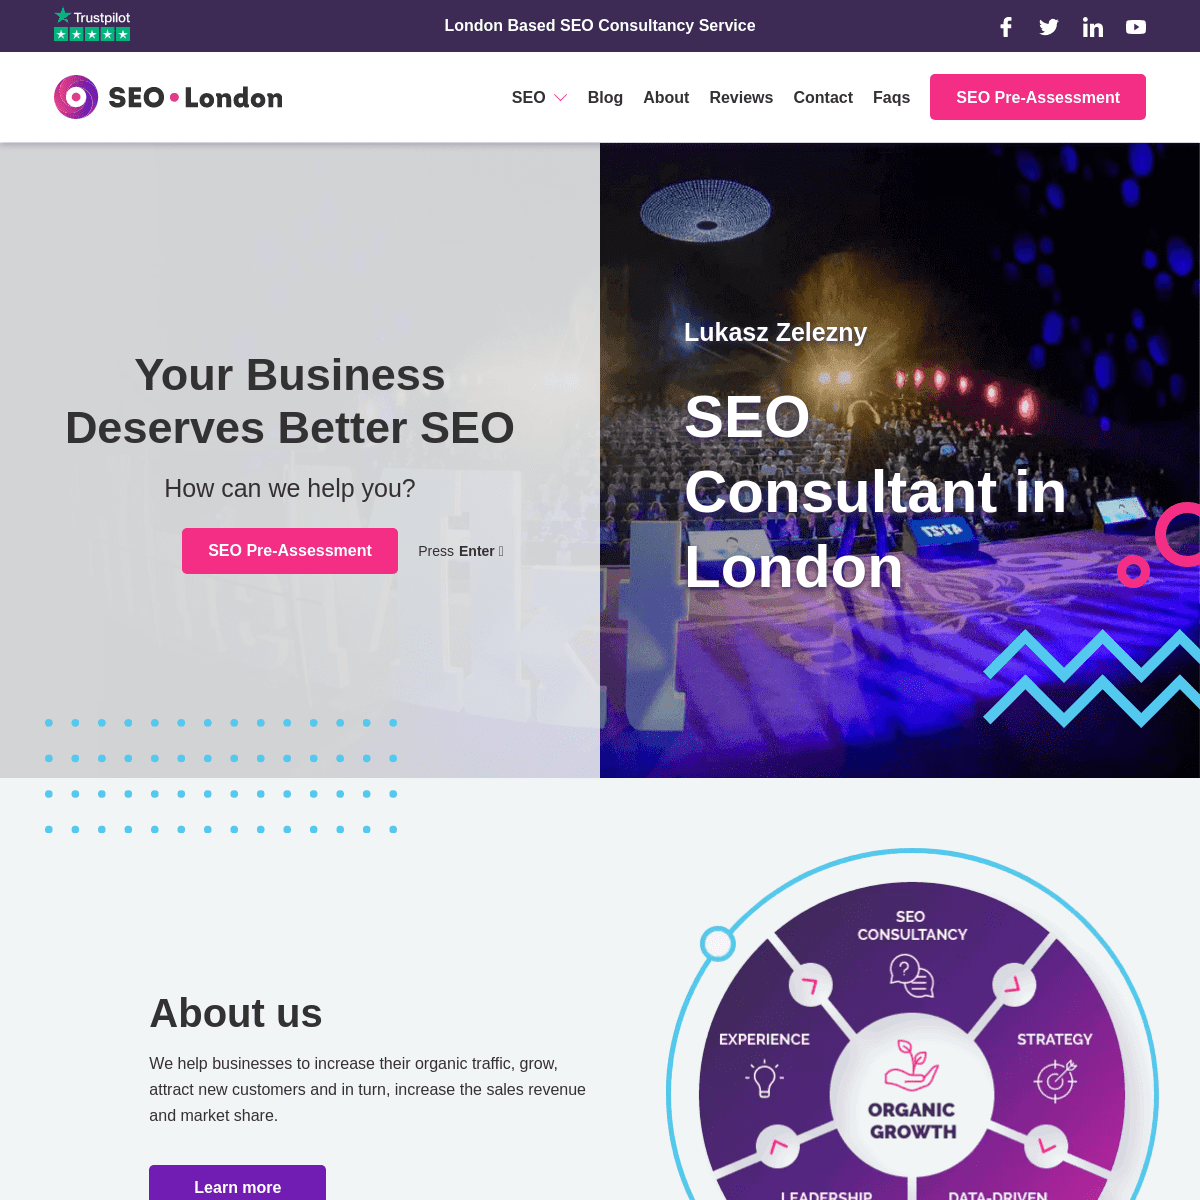 A complete backup of https://seo.london